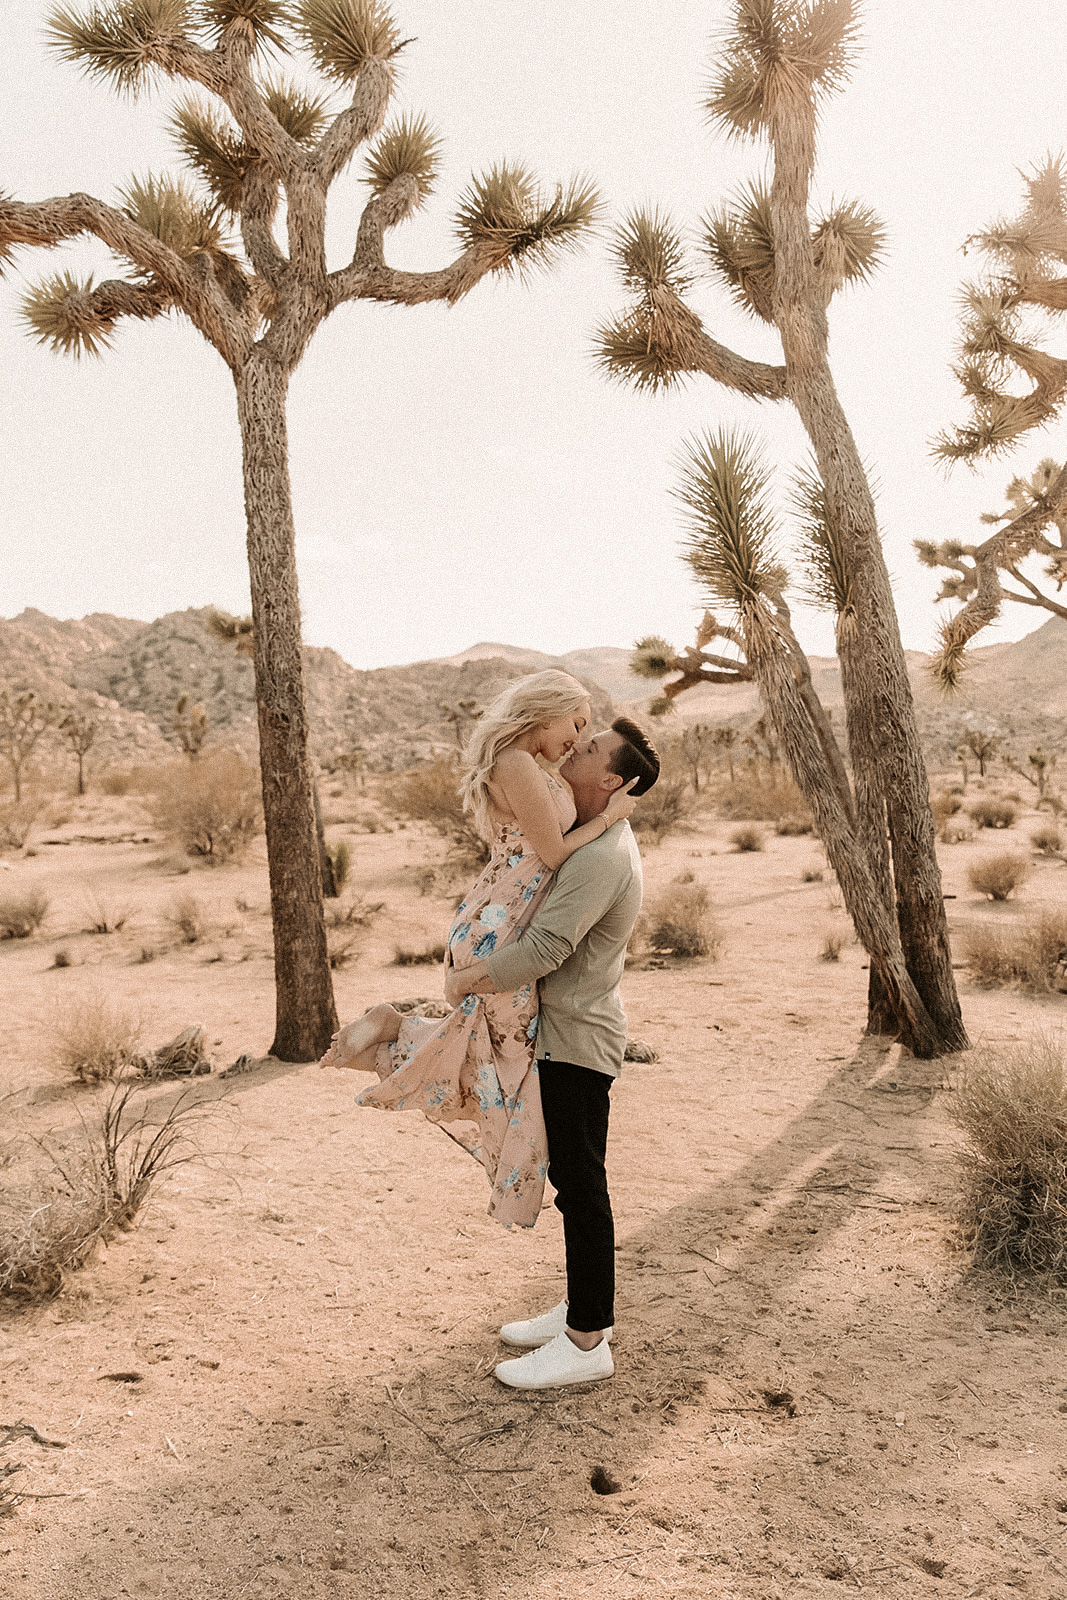 Couples | Hayley Larue | Engagement Photos | Couple Photo Ideas | Engaged | Joshua Tree Engagement | Blondie in the City